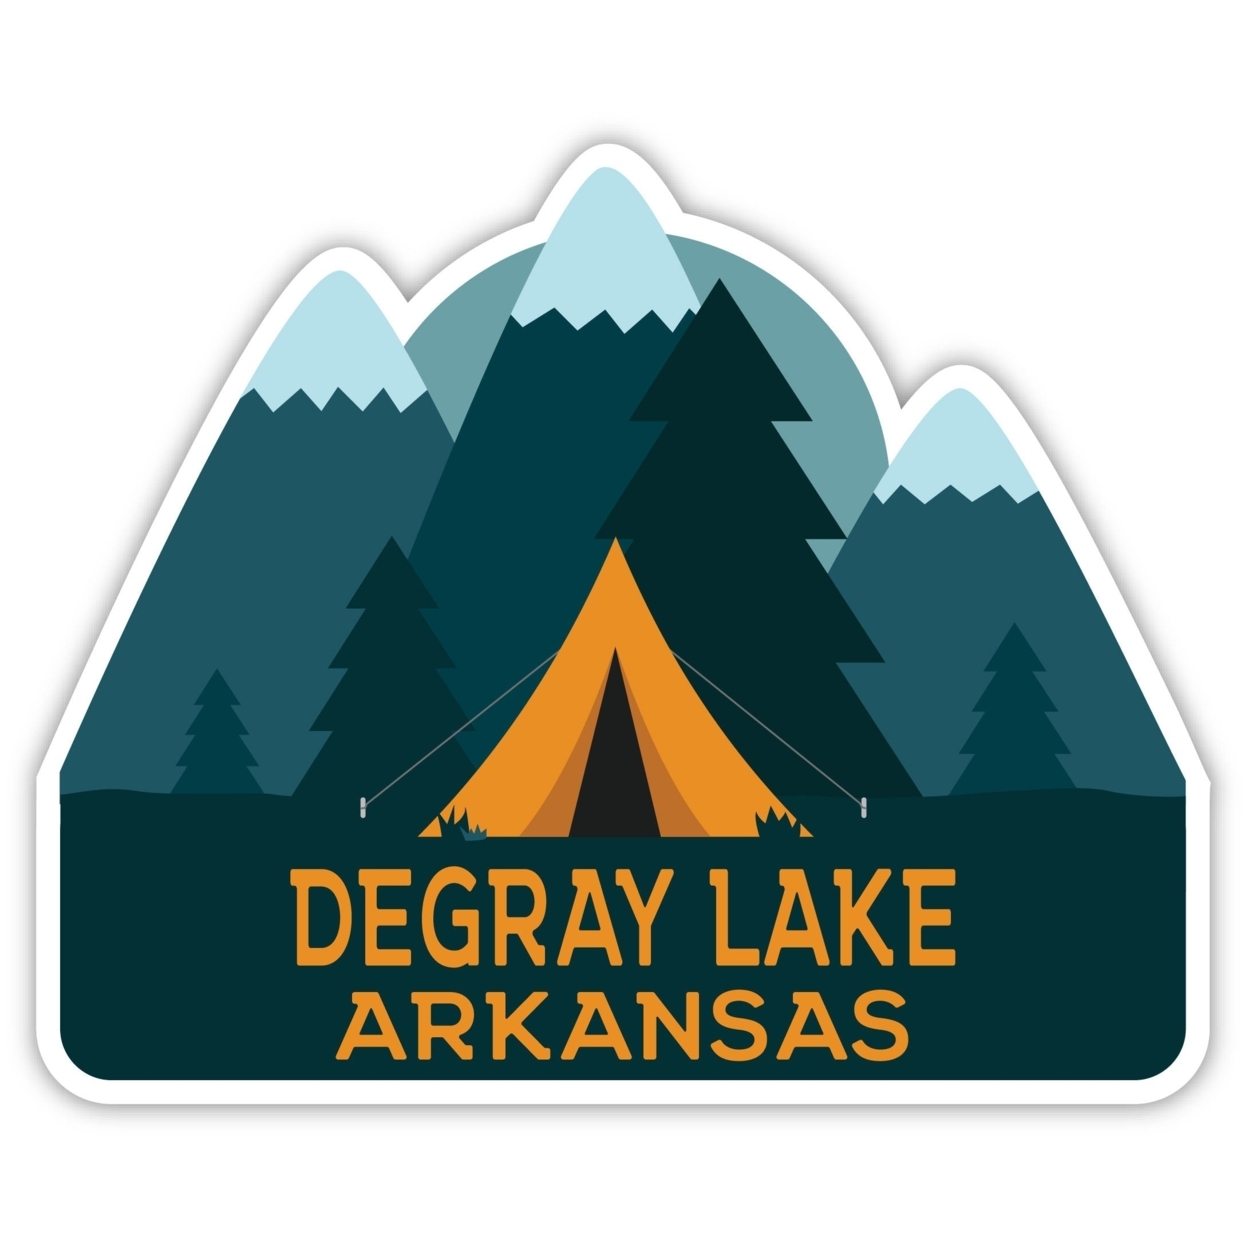 DeGray Lake Arkansas Souvenir Decorative Stickers (Choose Theme And Size) - 4-Pack, 2-Inch, Tent